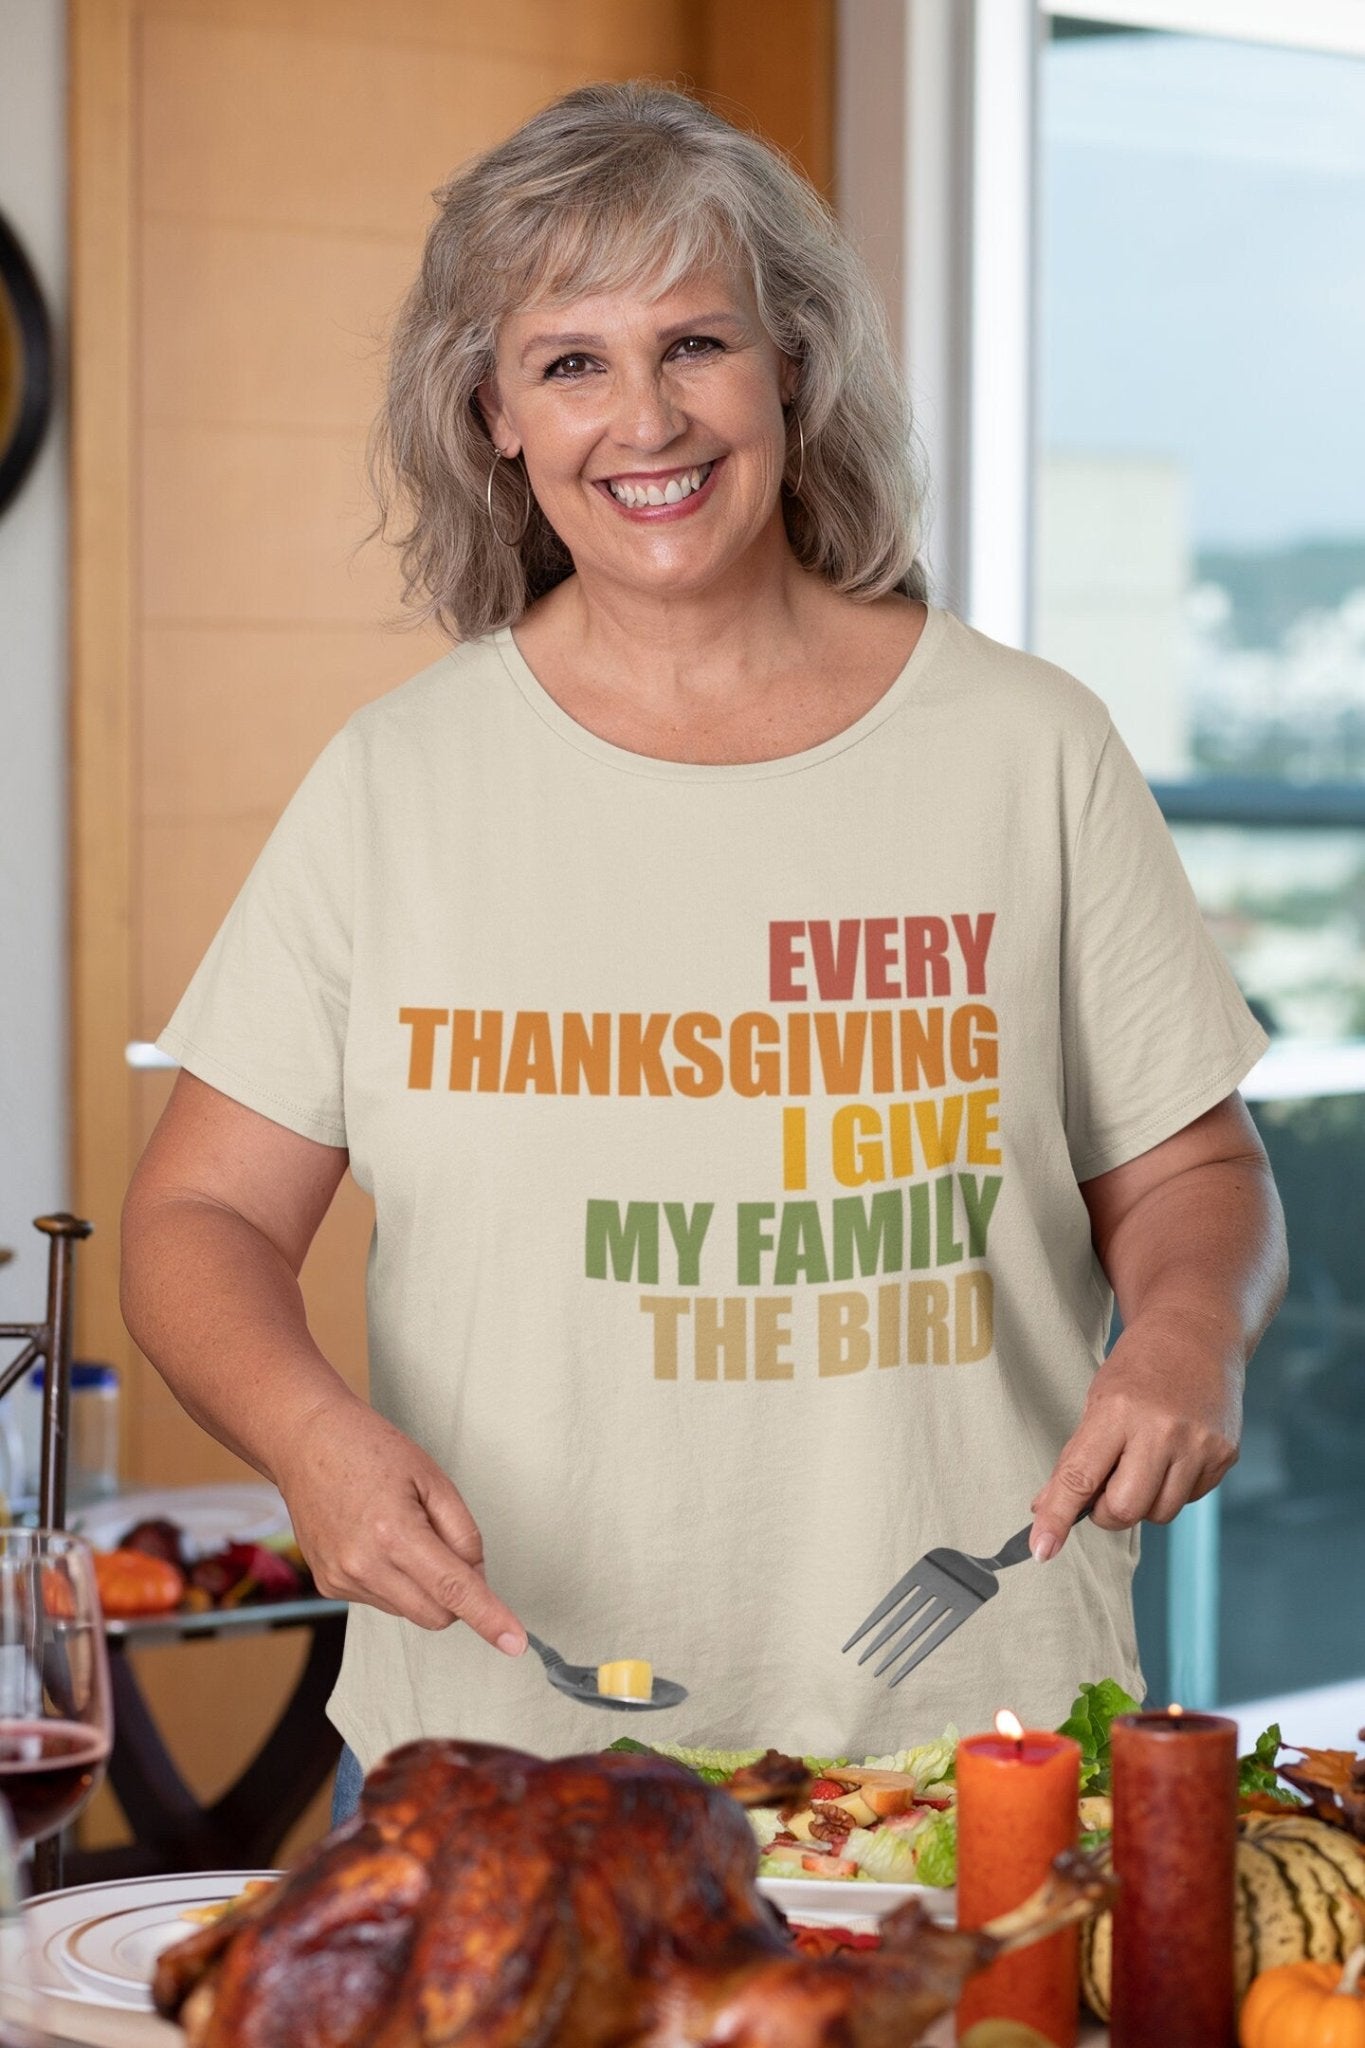 Every Thanksgiving I give my family the bird, Funny Thanksgiving Shirt - SBS T Shop